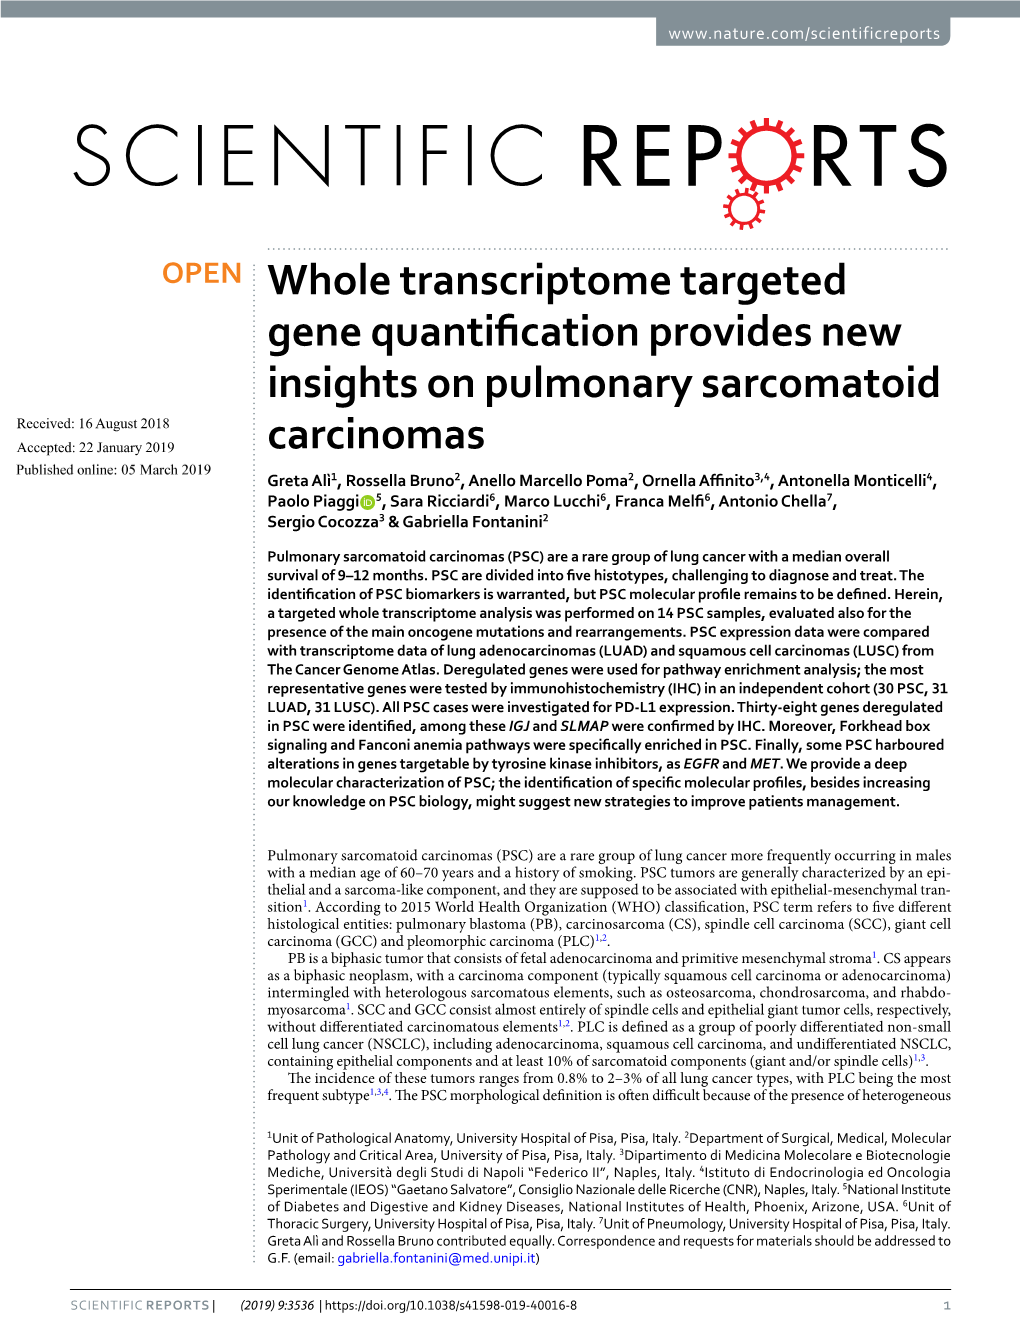 Whole Transcriptome Targeted Gene Quantification Provides New Insights